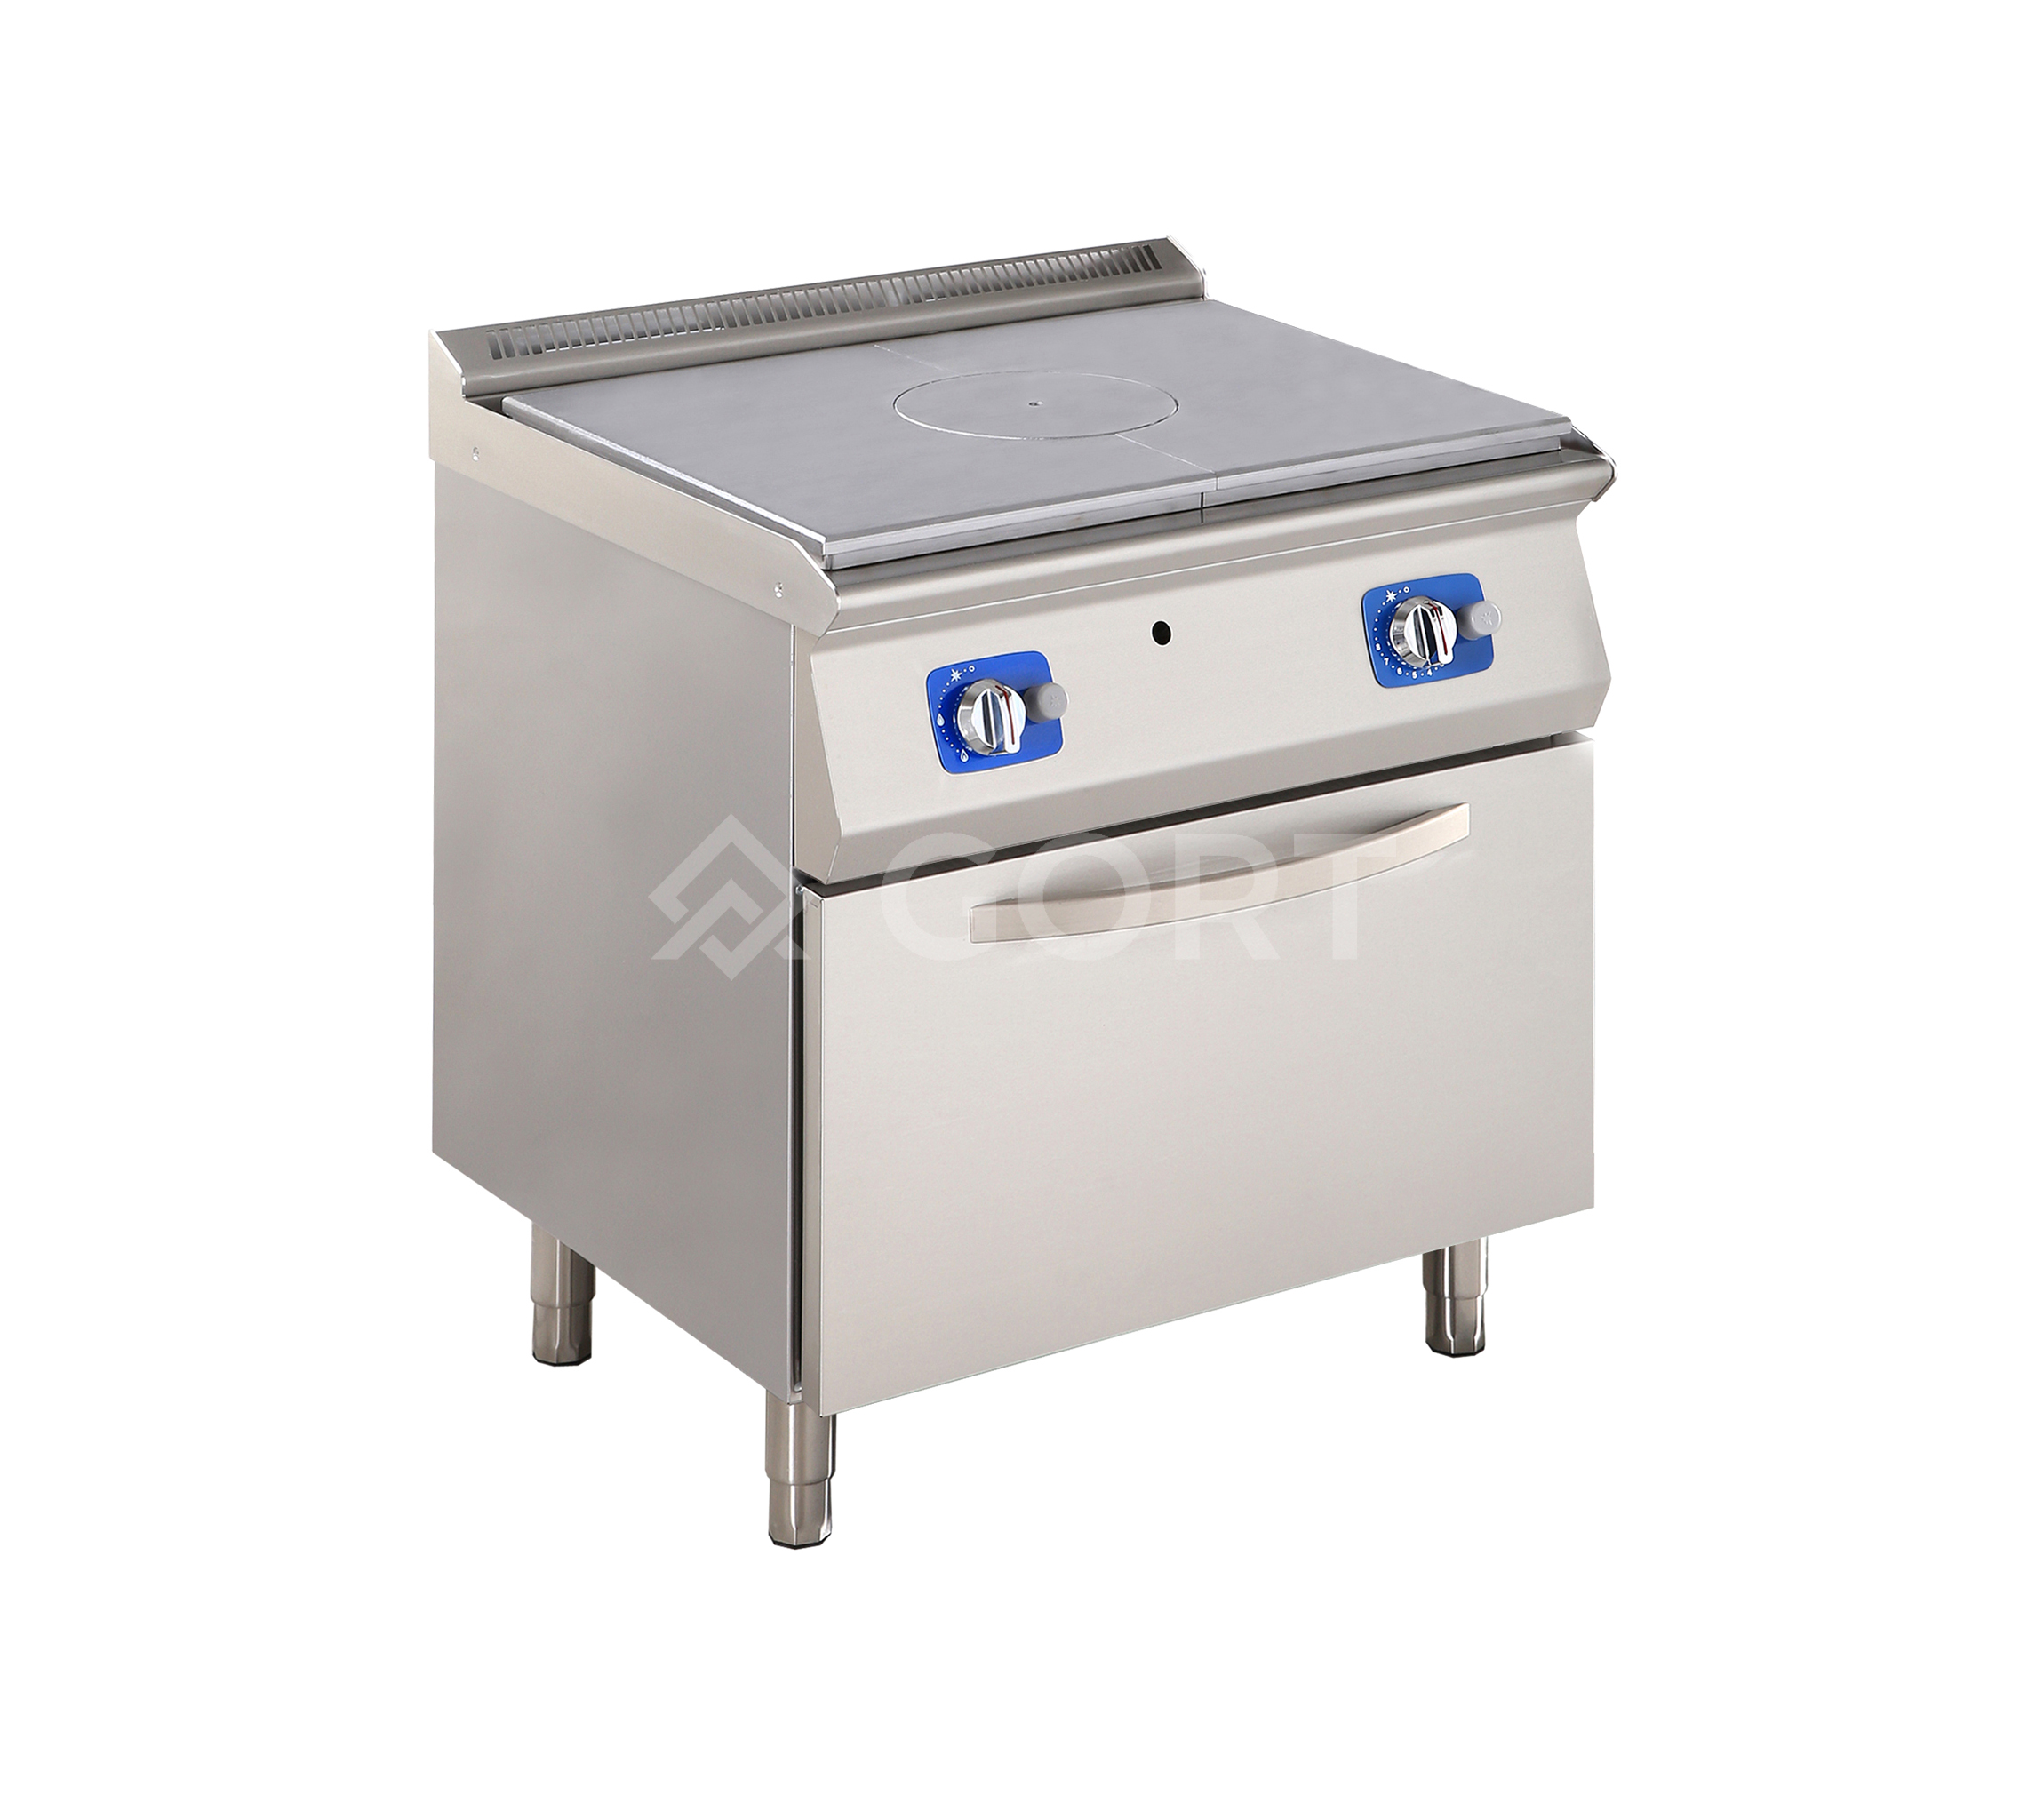 Gas solid top on gas oven